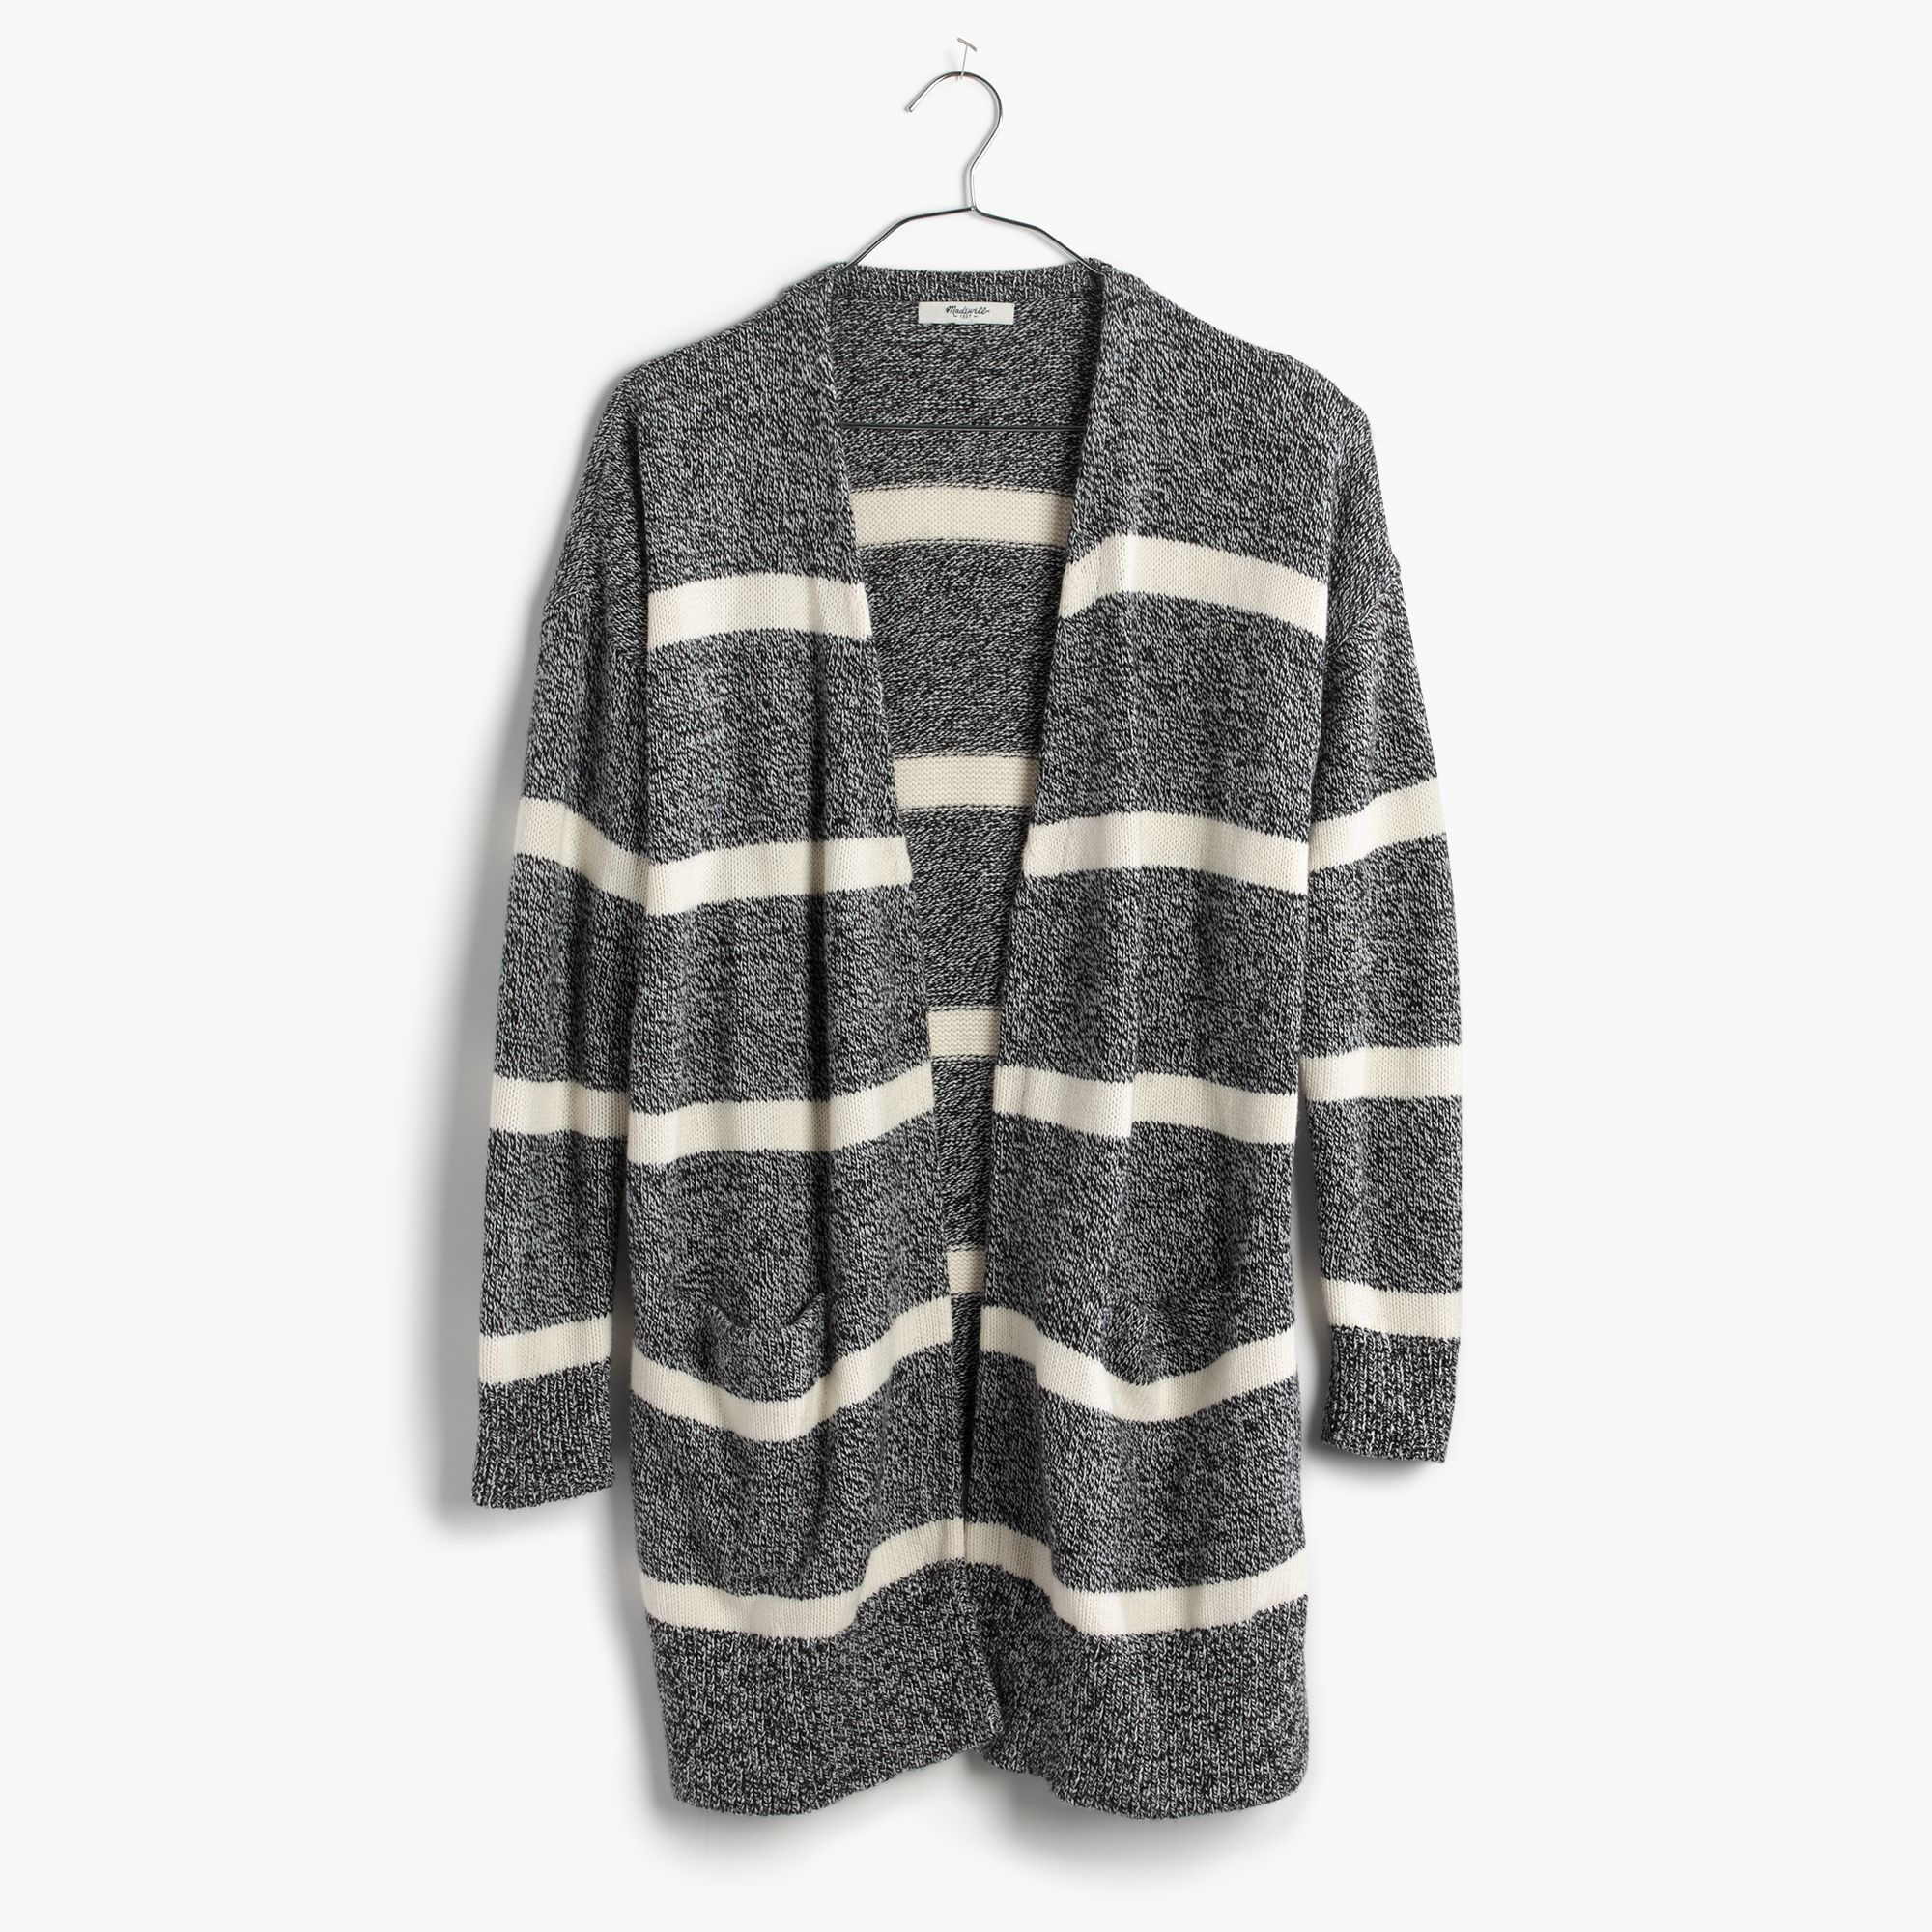 Lyst - Madewell Striped Open Cardigan Sweater in Gray